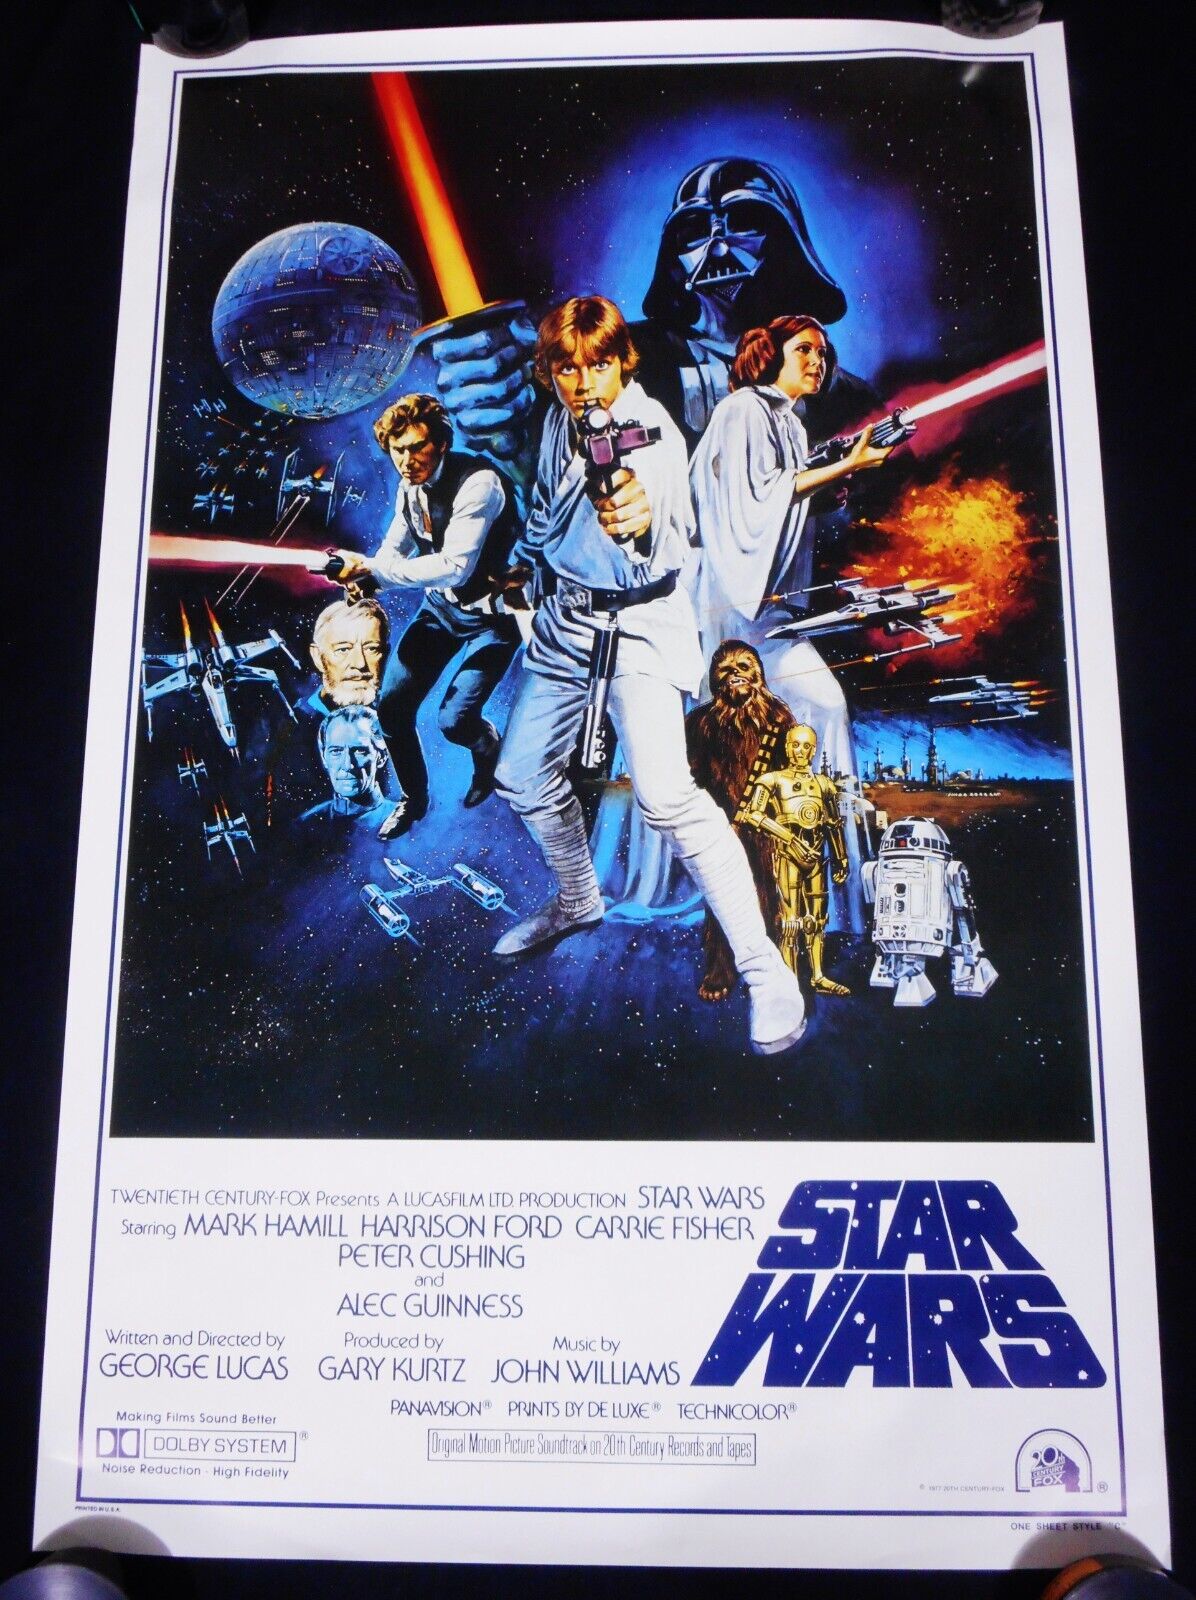 STAR WARS 1977 * STYLE-C 27x41 BOOTLEG ONE SHEET MOVIE POSTER * C10 MINT ROLLED